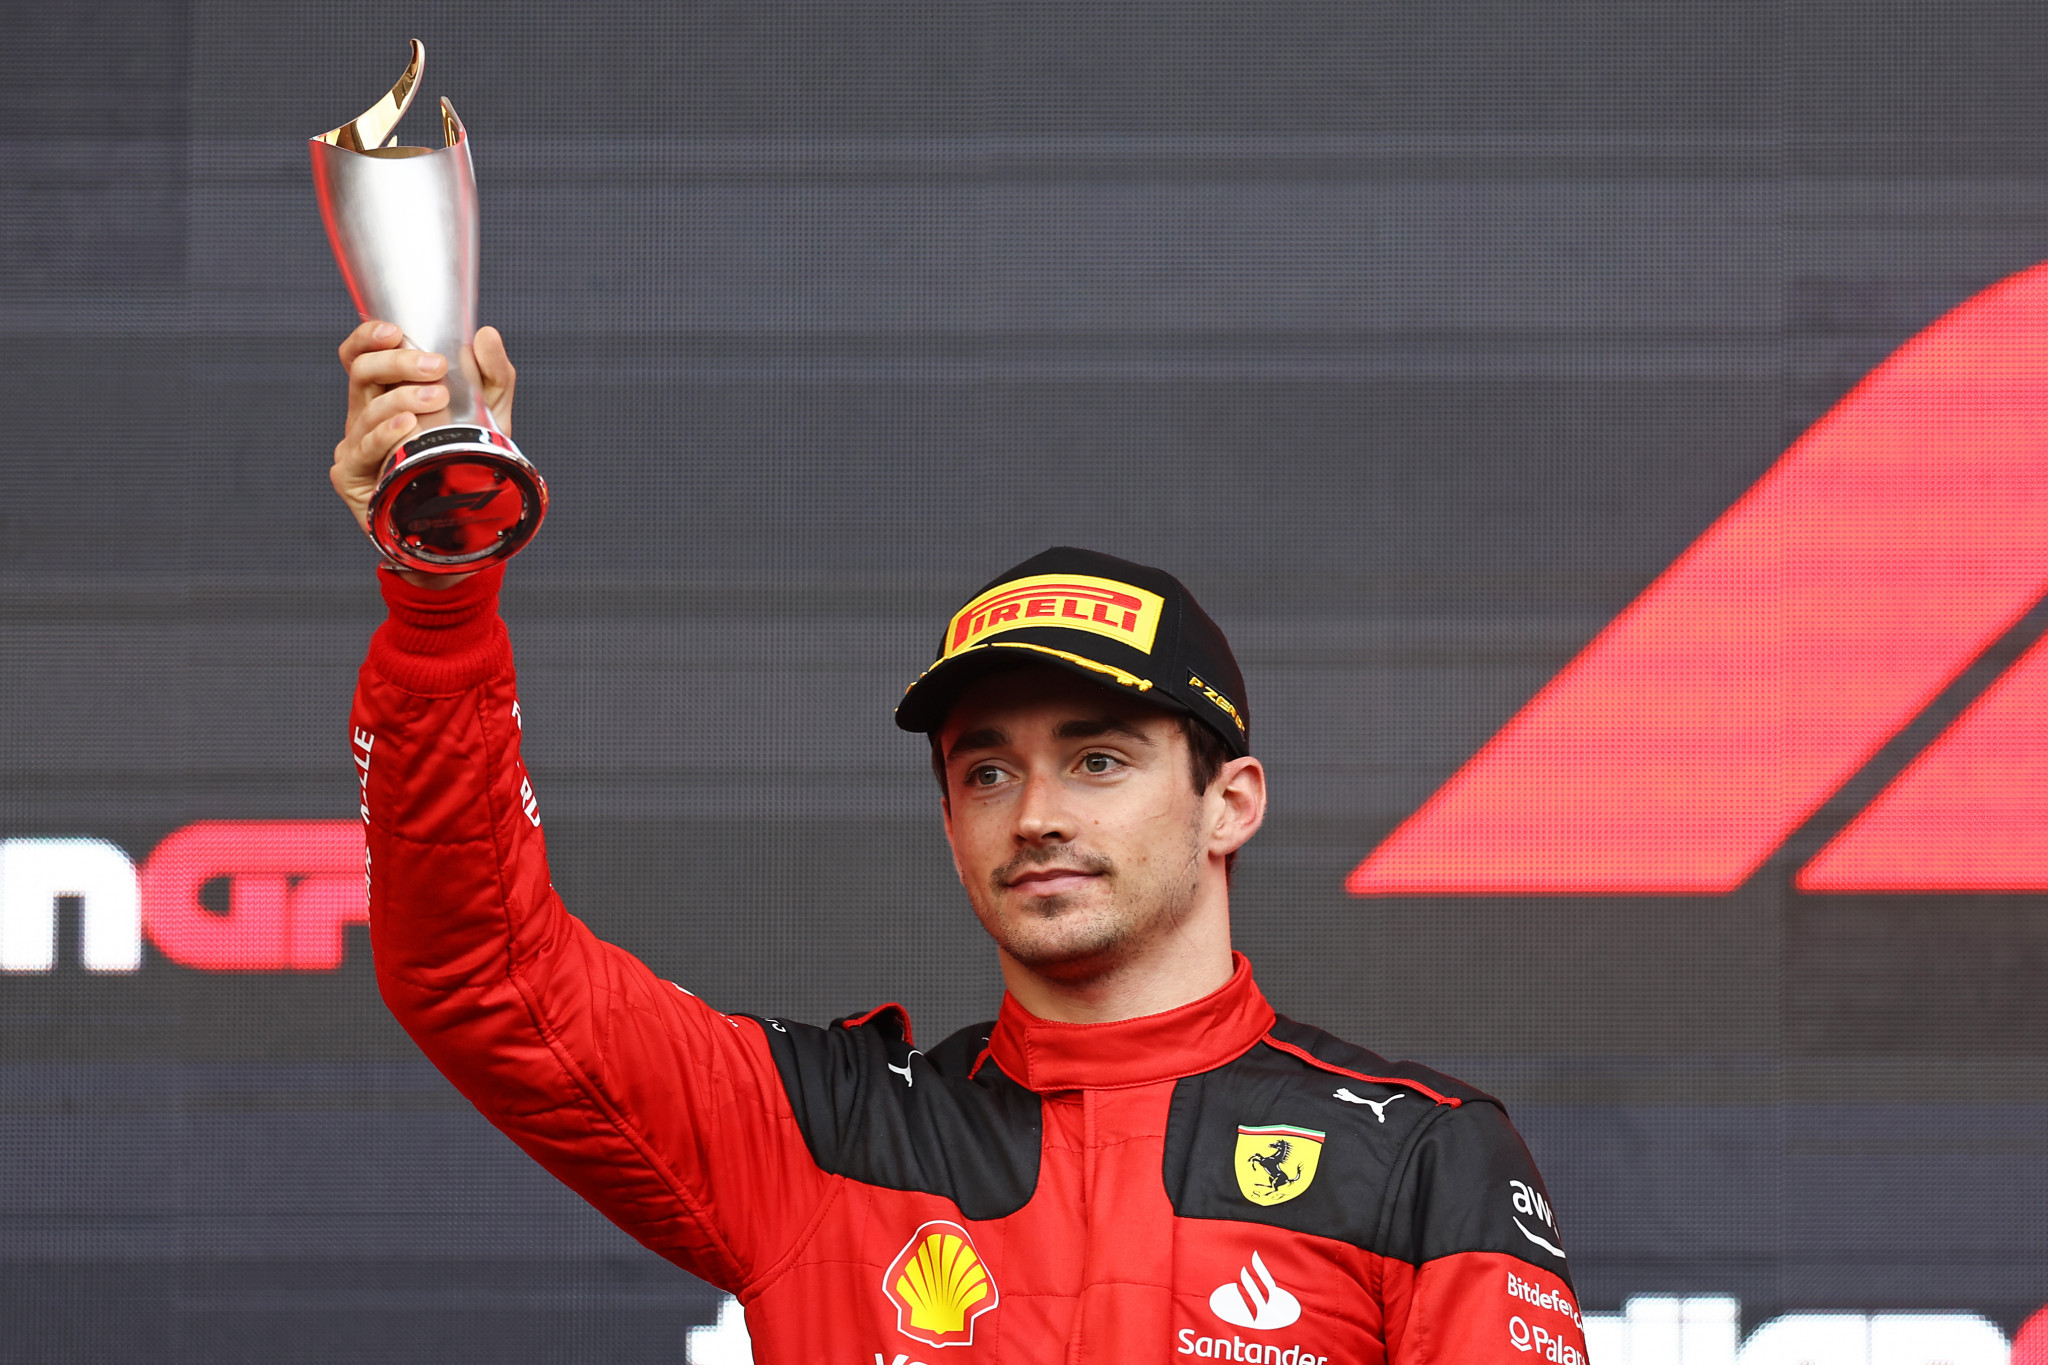 The Monégasque driver was still content with the podium finish as it is his best result this season after a spluttering start to the year ©Getty Images